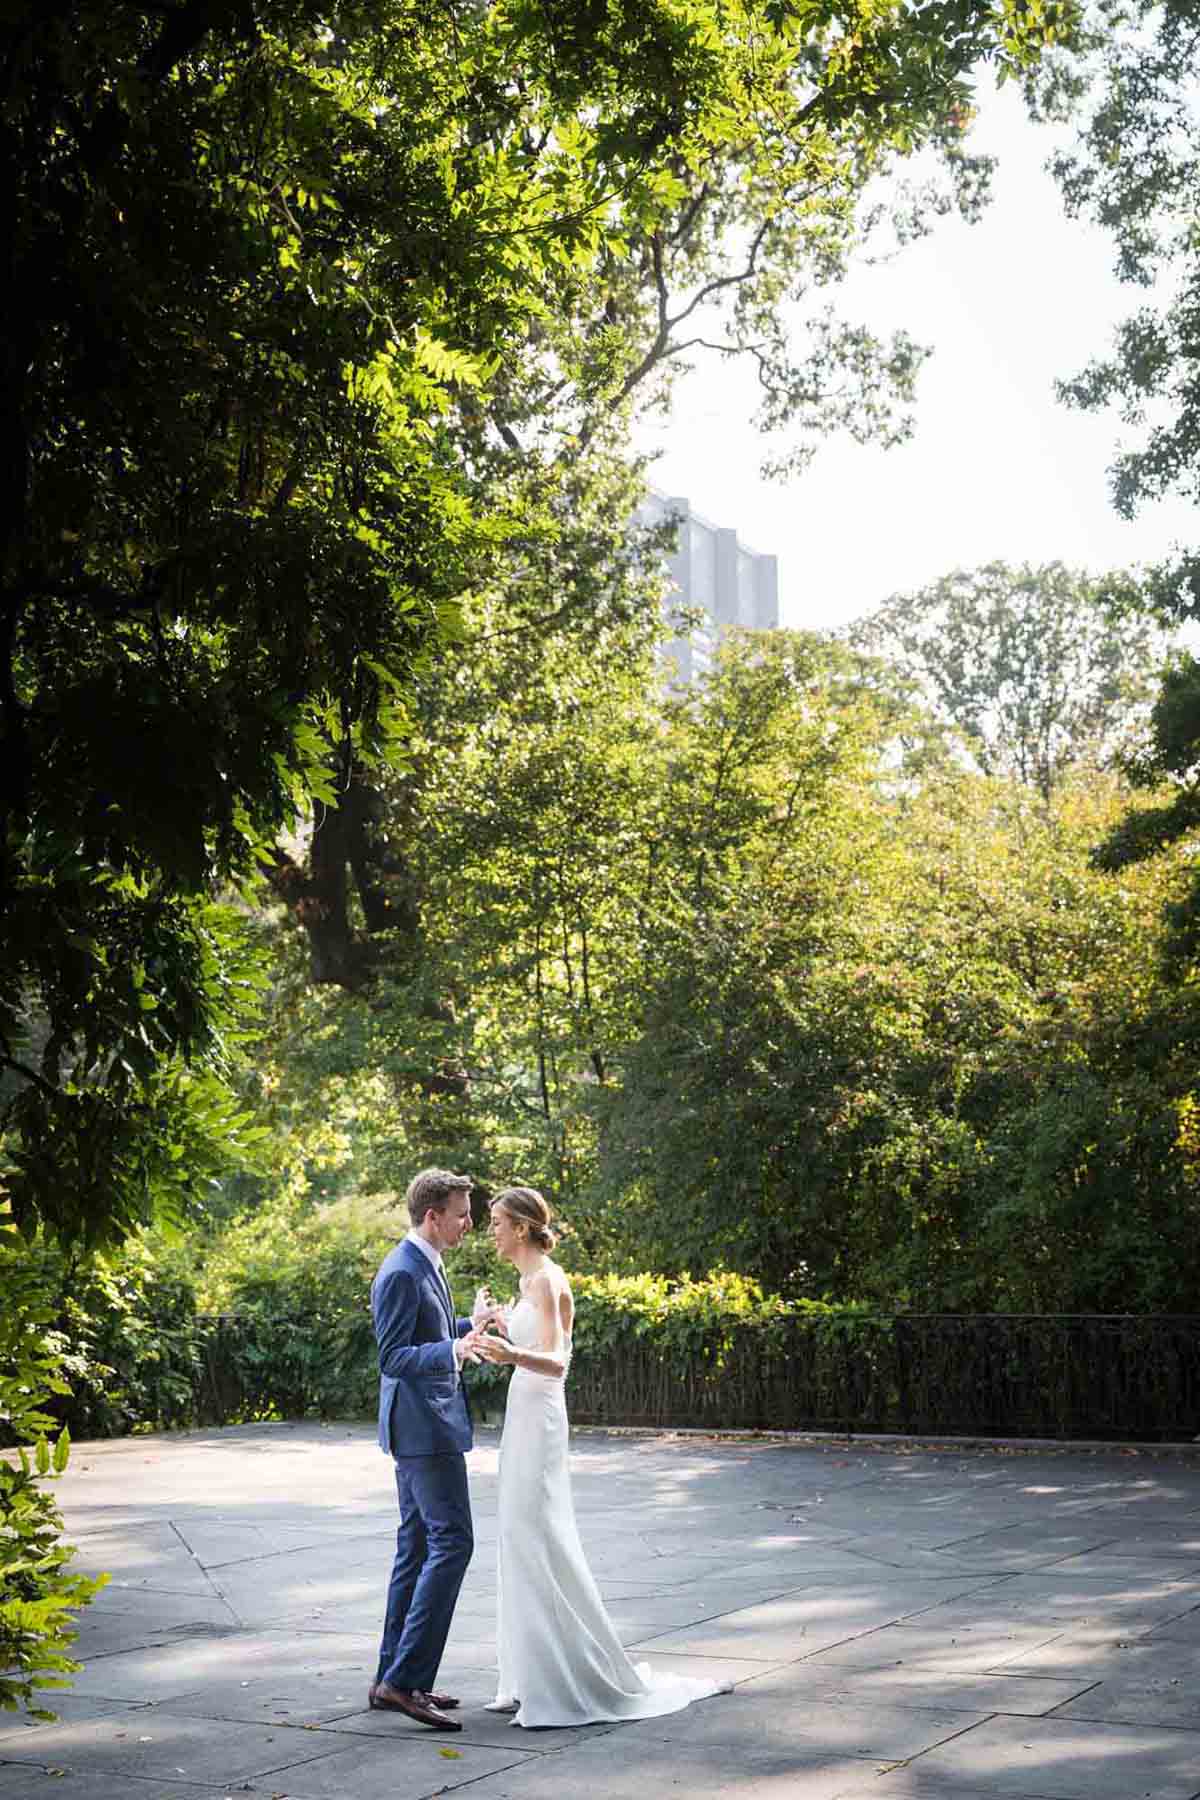 Couple dancing on patio outside Wisteria Terrace during a Conservatory Garden wedding in Central Park